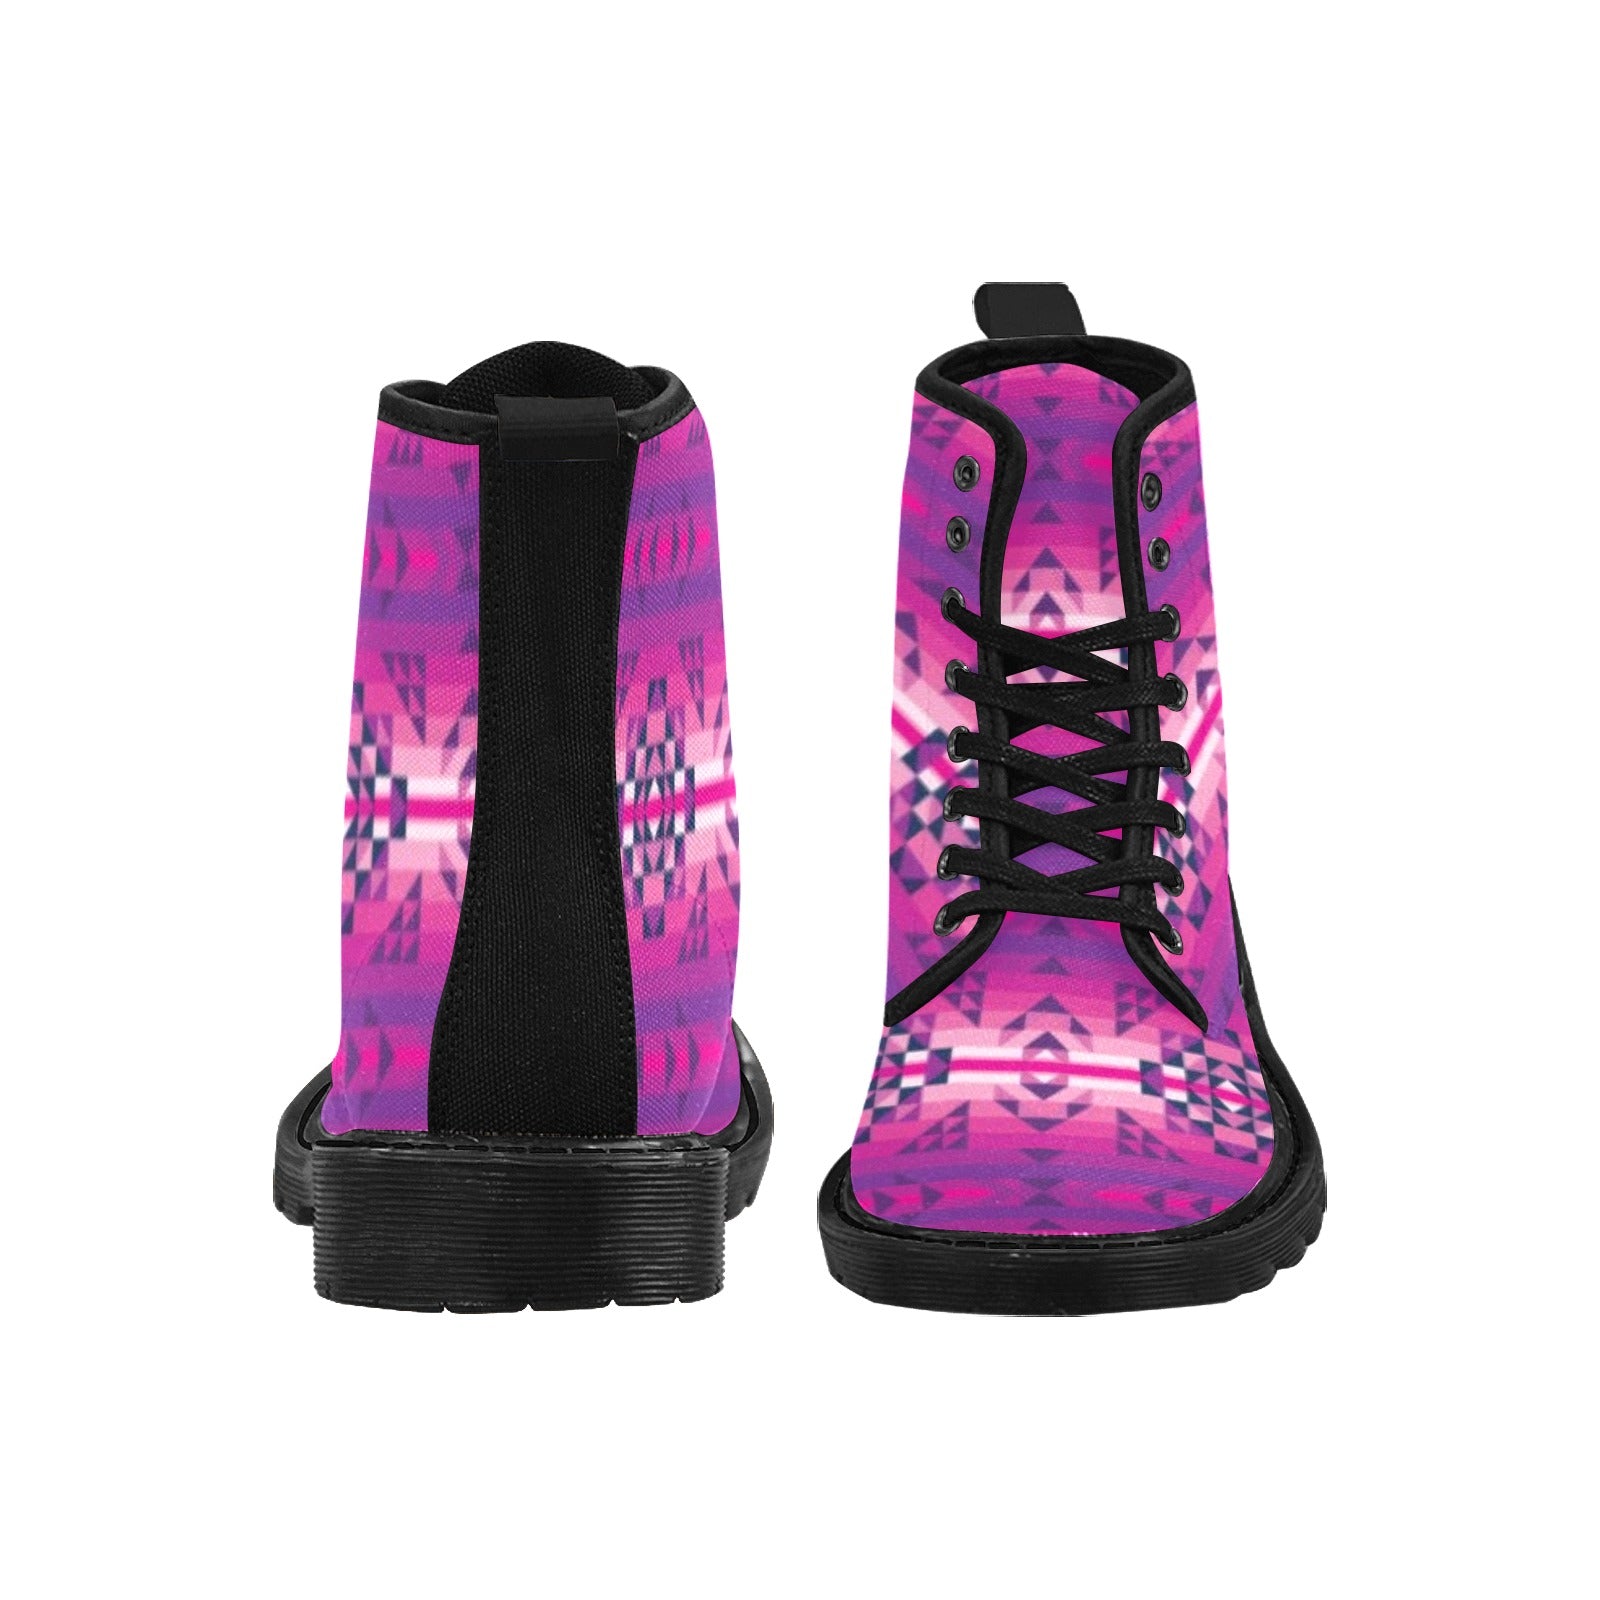 Royal Airspace Boots for Women (Black)